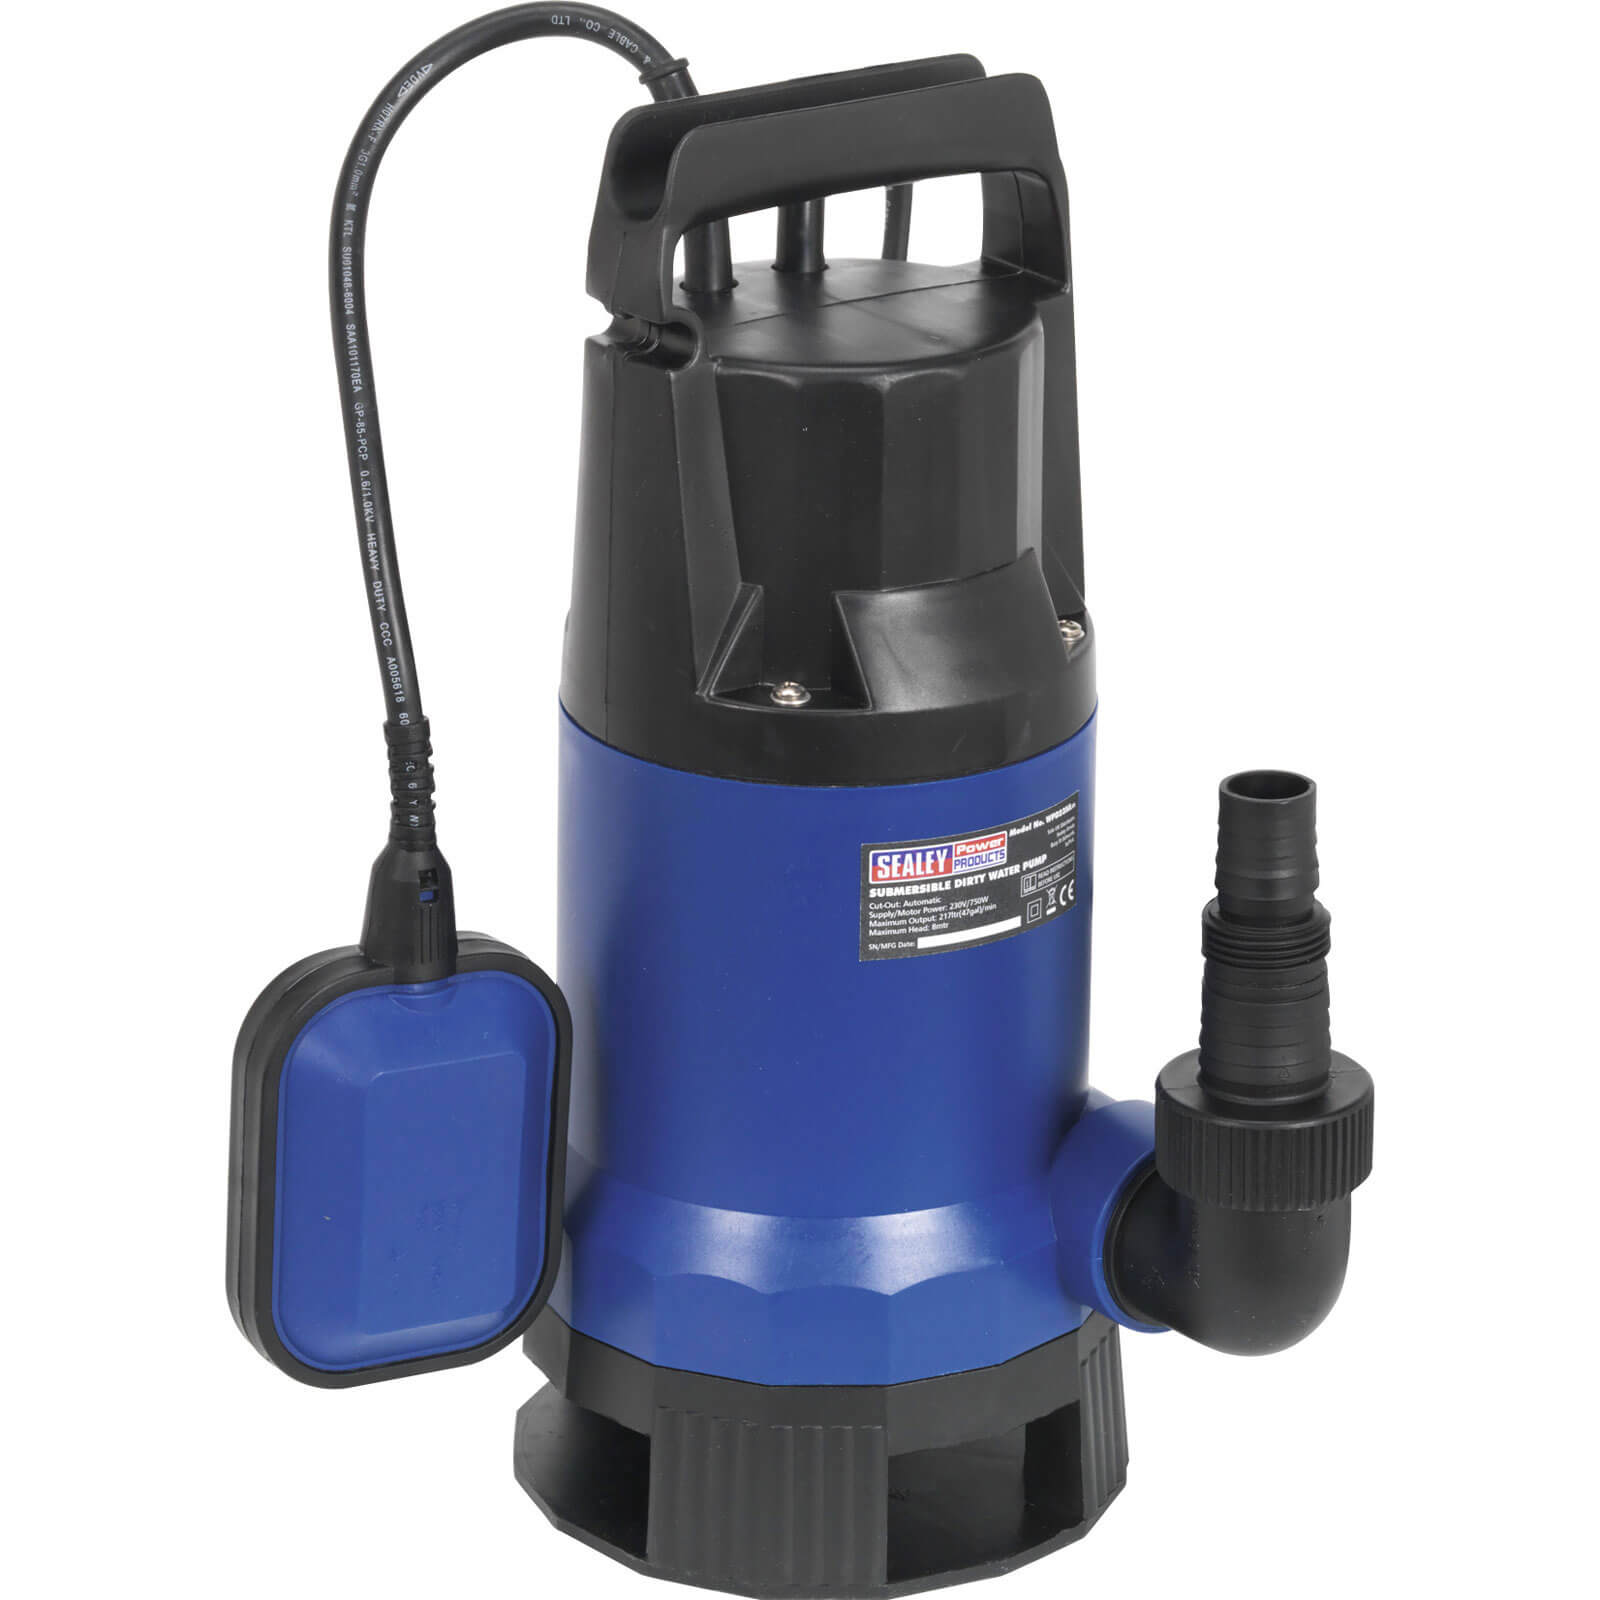 Sealey submersible pumps